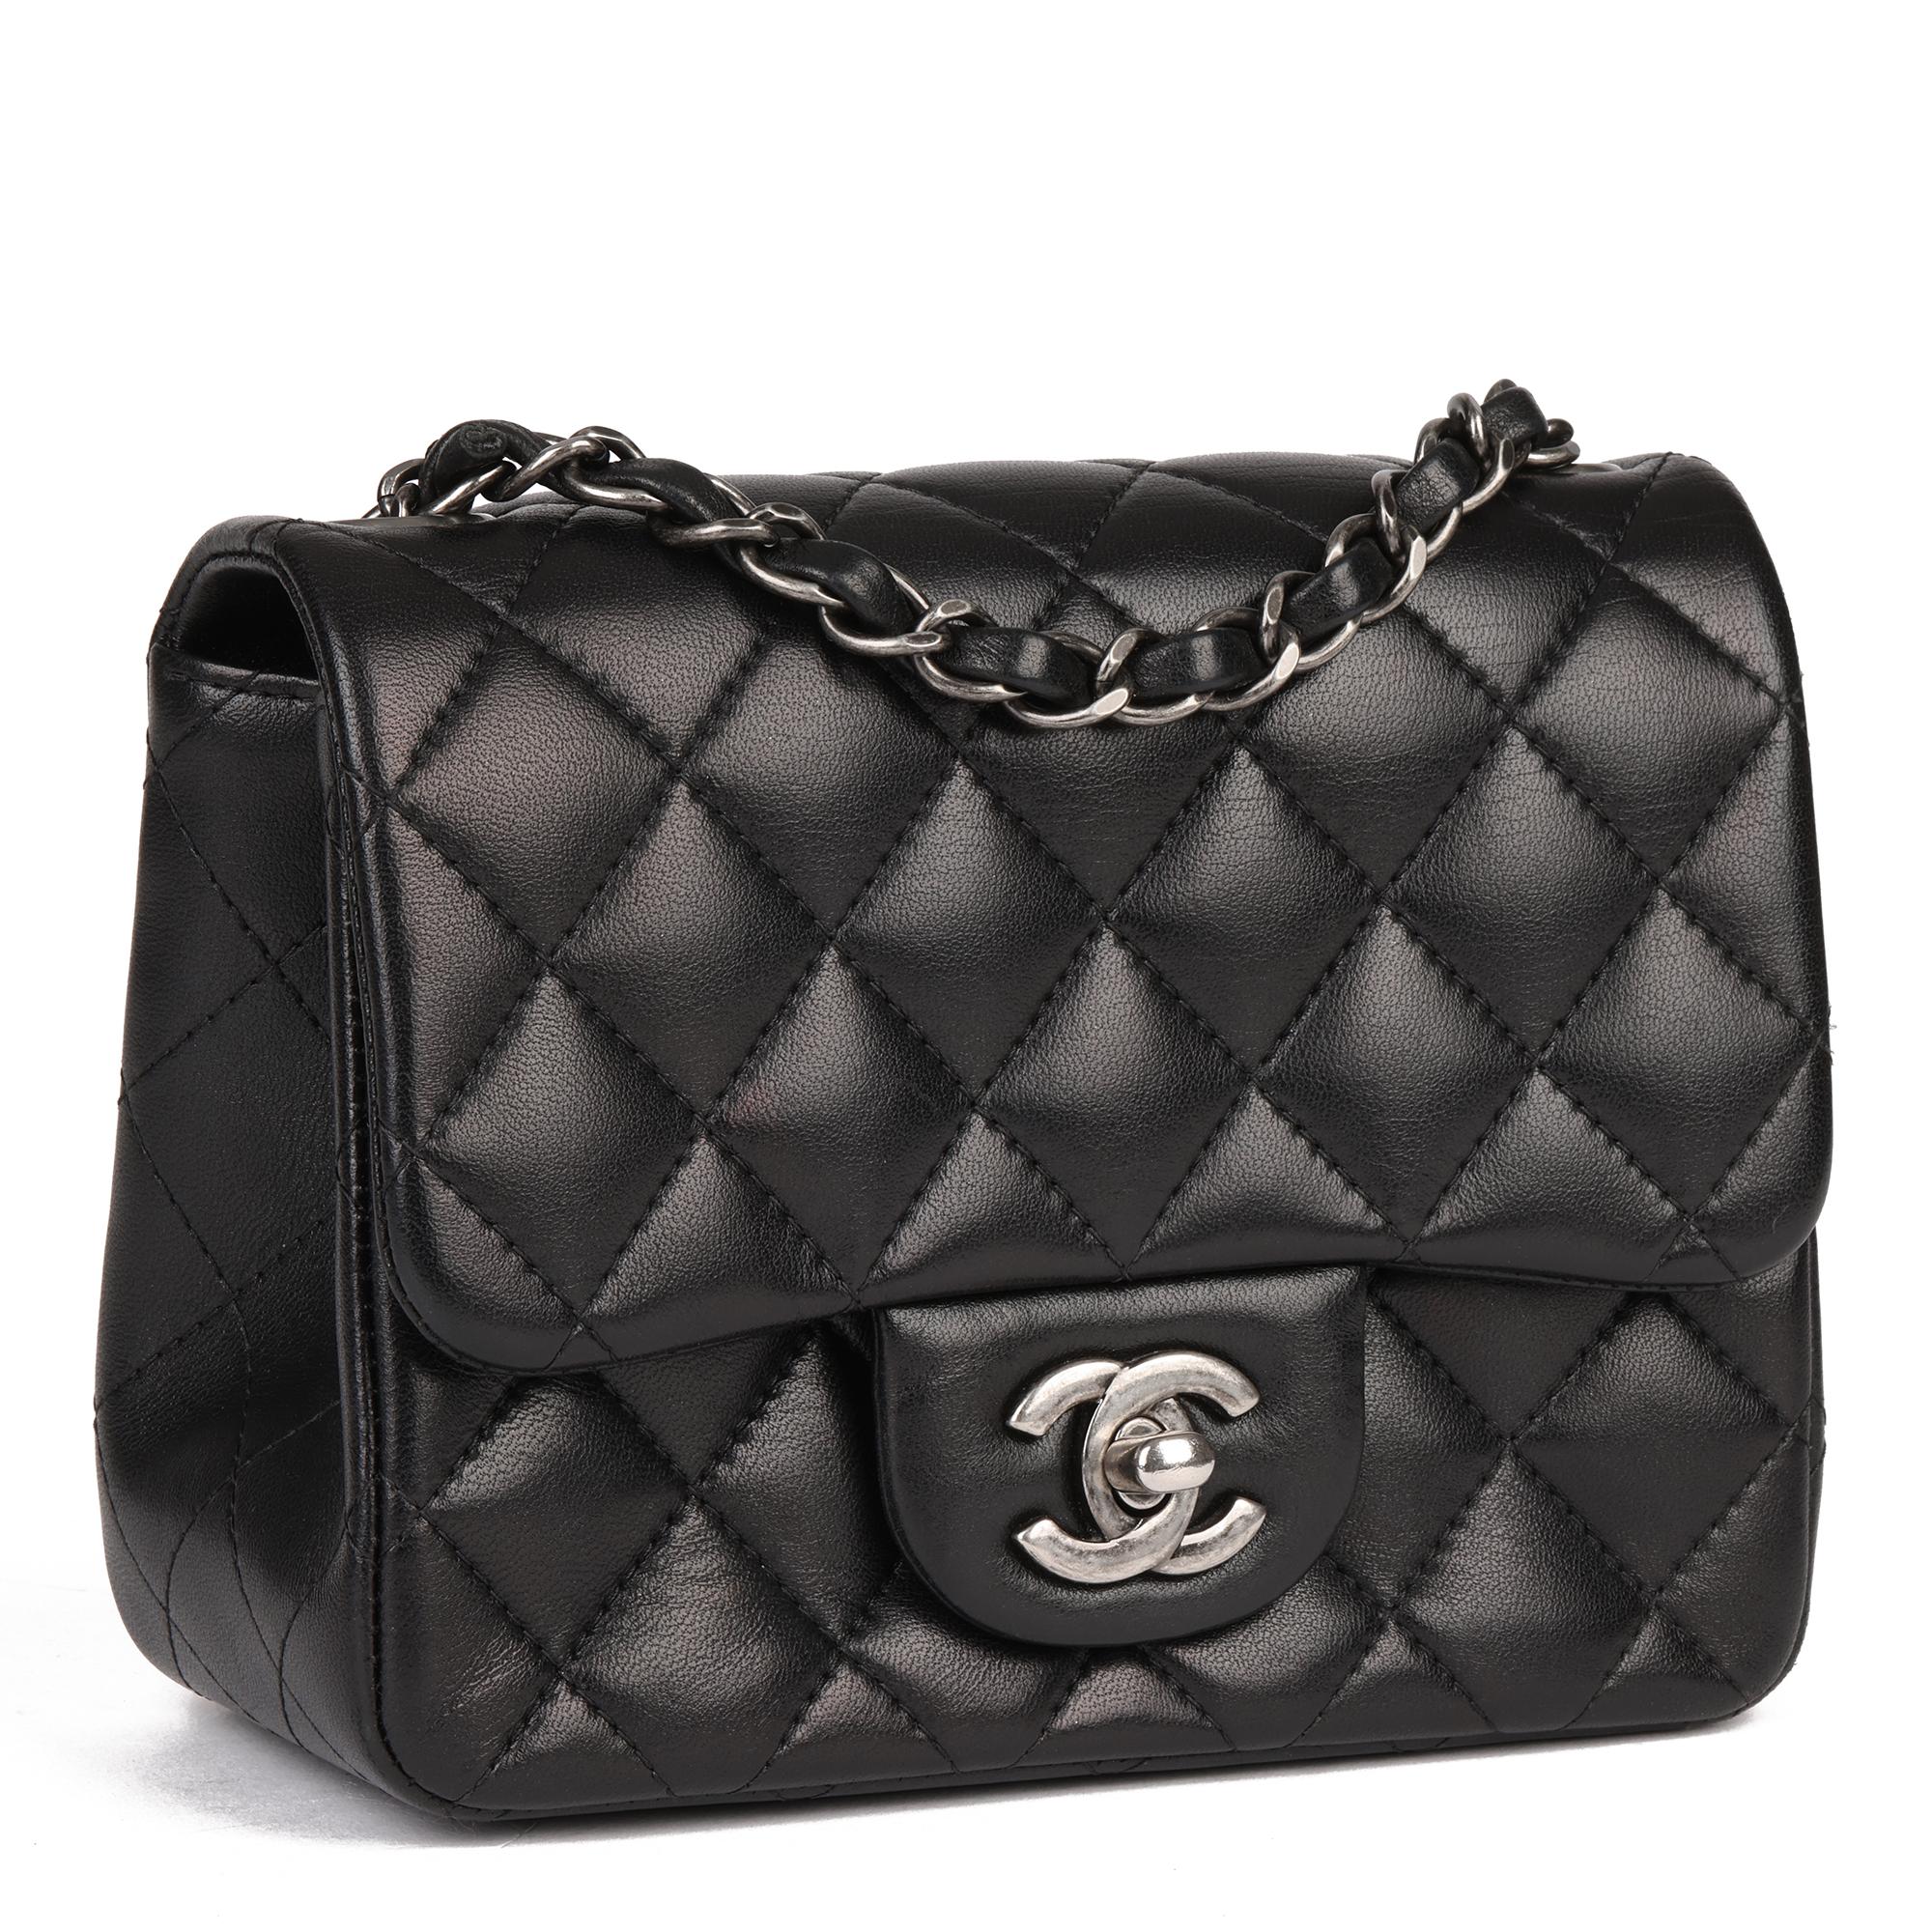 Women's Chanel 2015 Black Quilted Lambskin Leather Mini Flap Bag